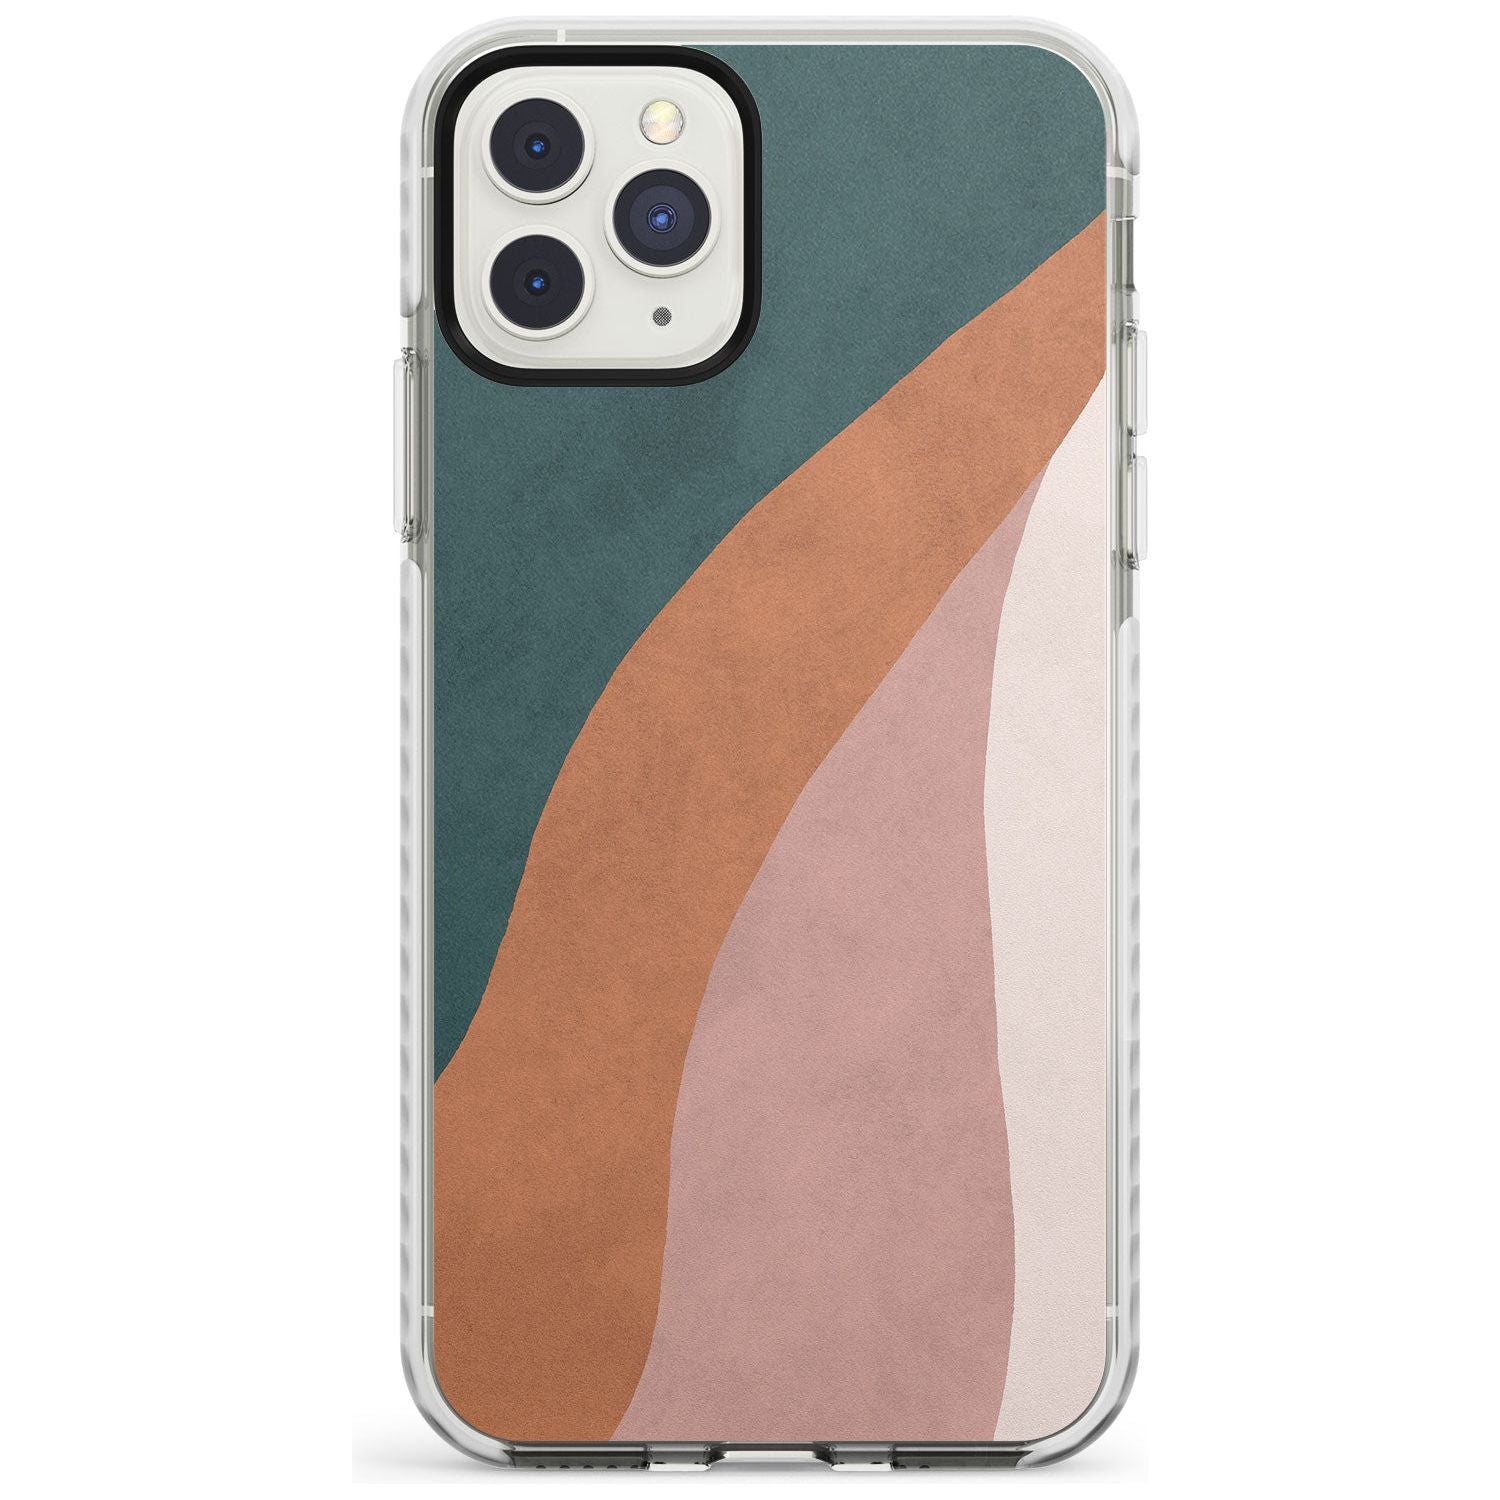 Lush Abstract Watercolour: Design #7 Impact Phone Case for iPhone 11 Pro Max